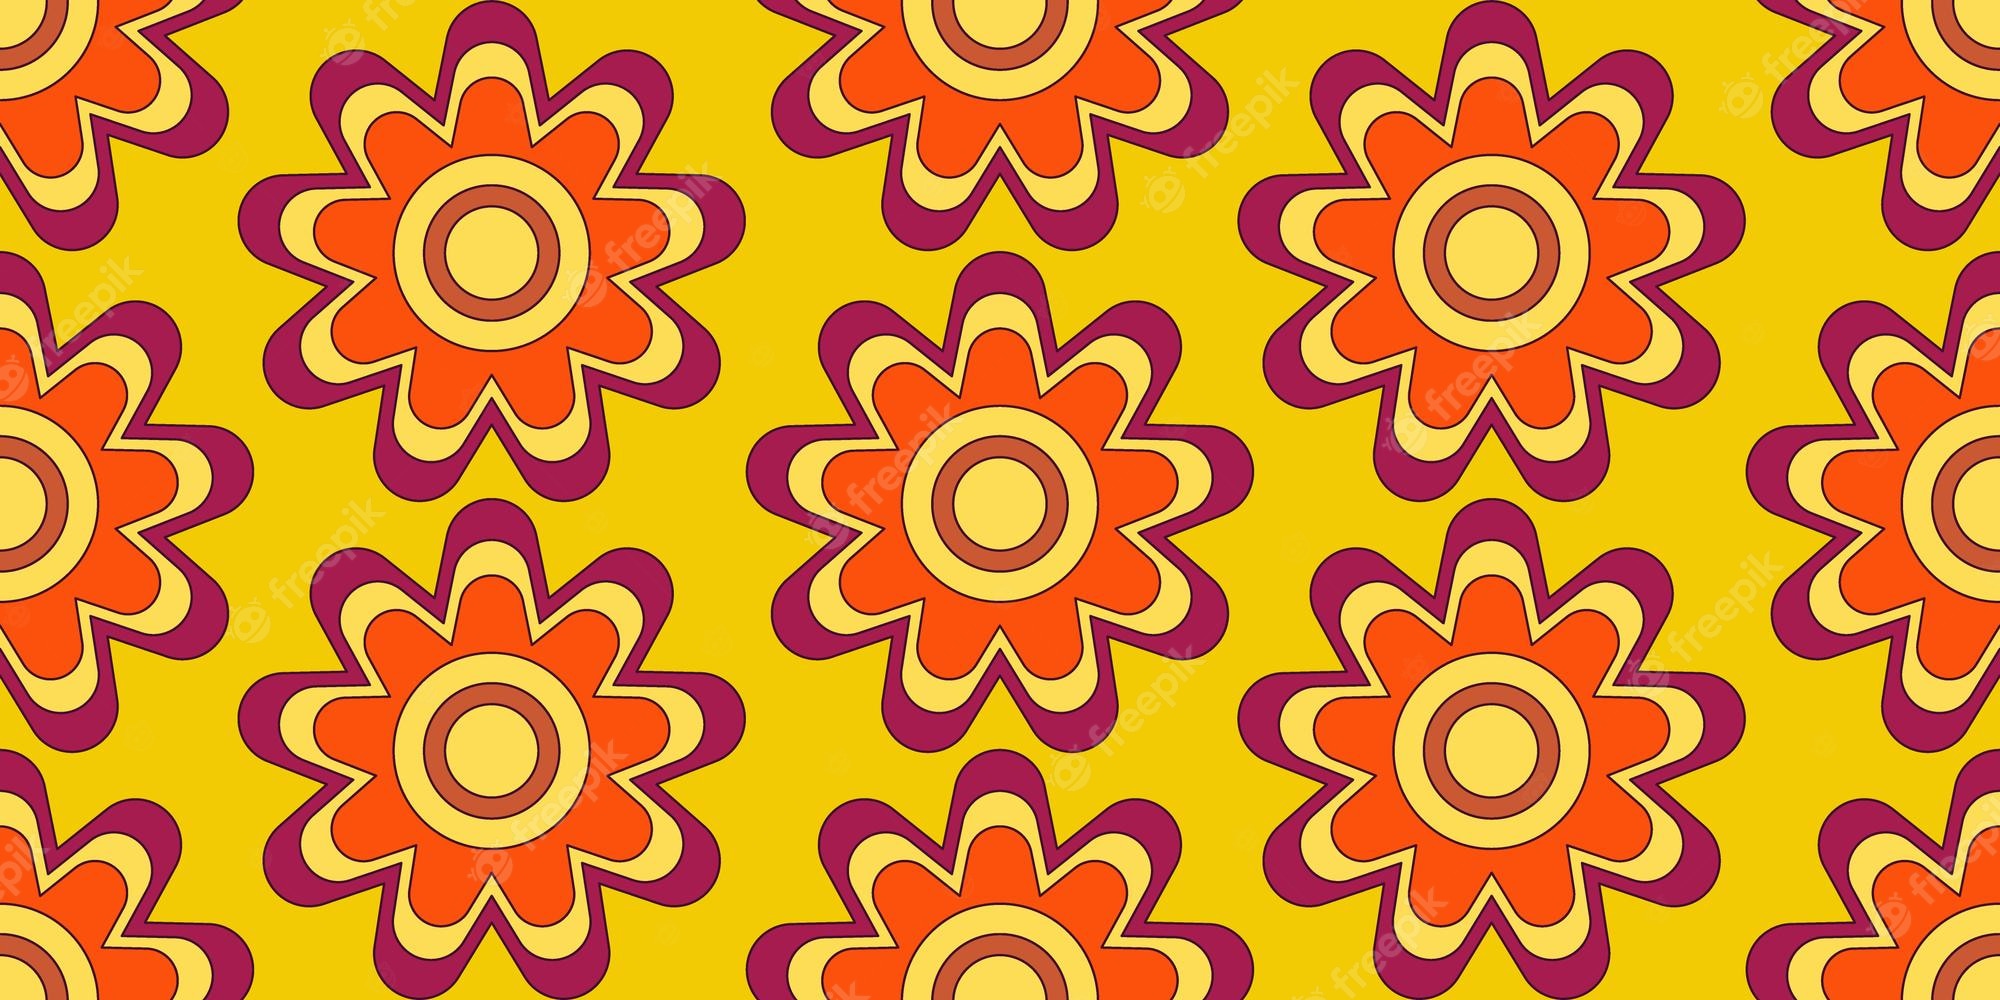 Groovy 70s Background Image